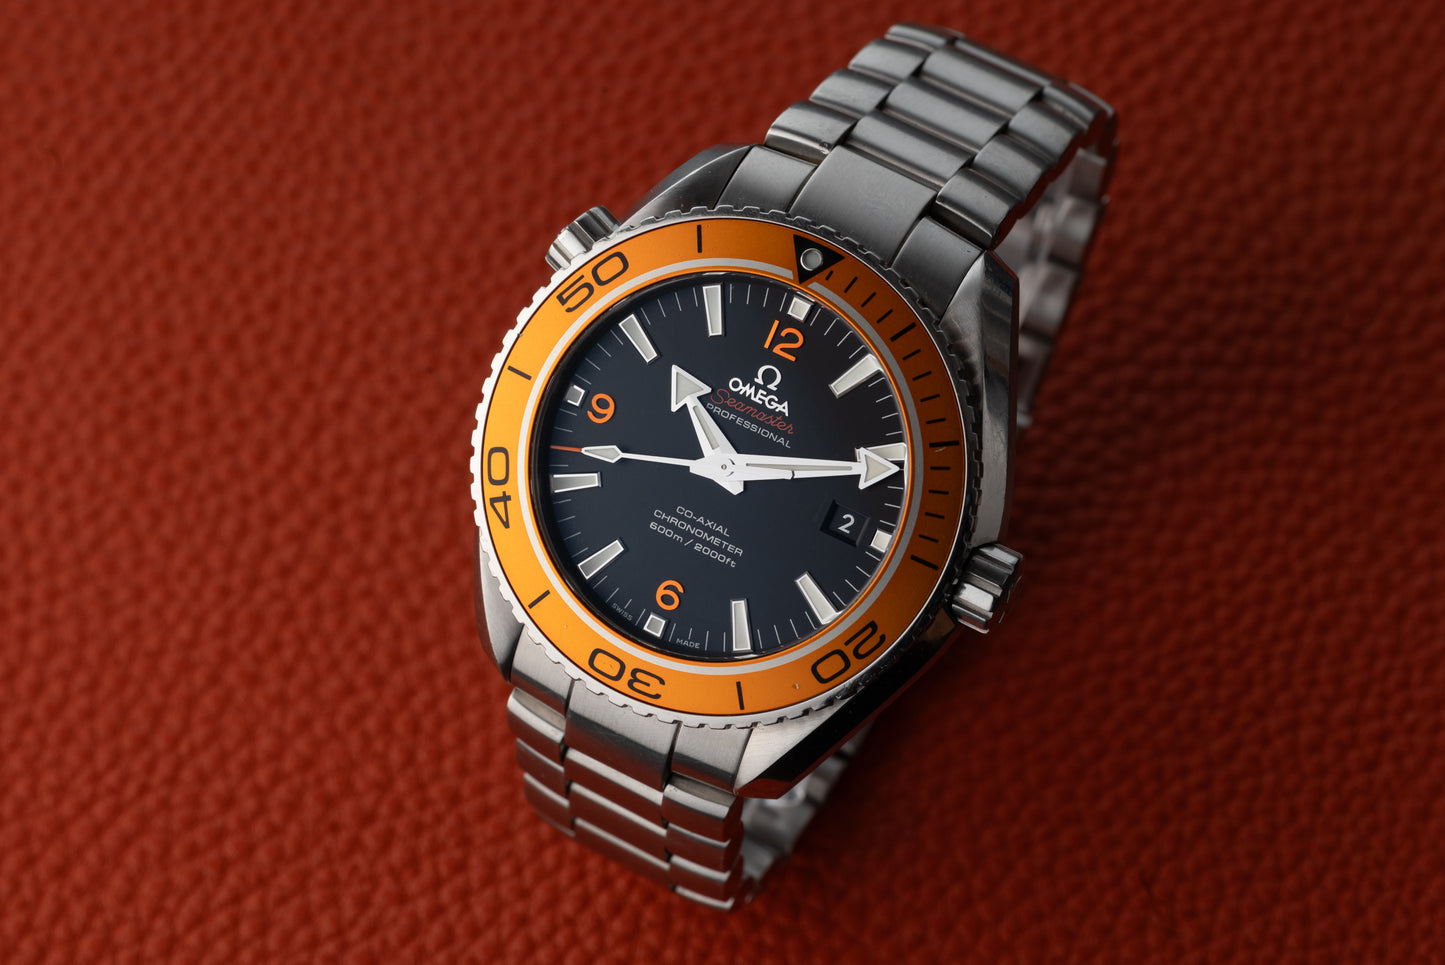 Omega Seamaster Planet Ocean 600M Co-Axial